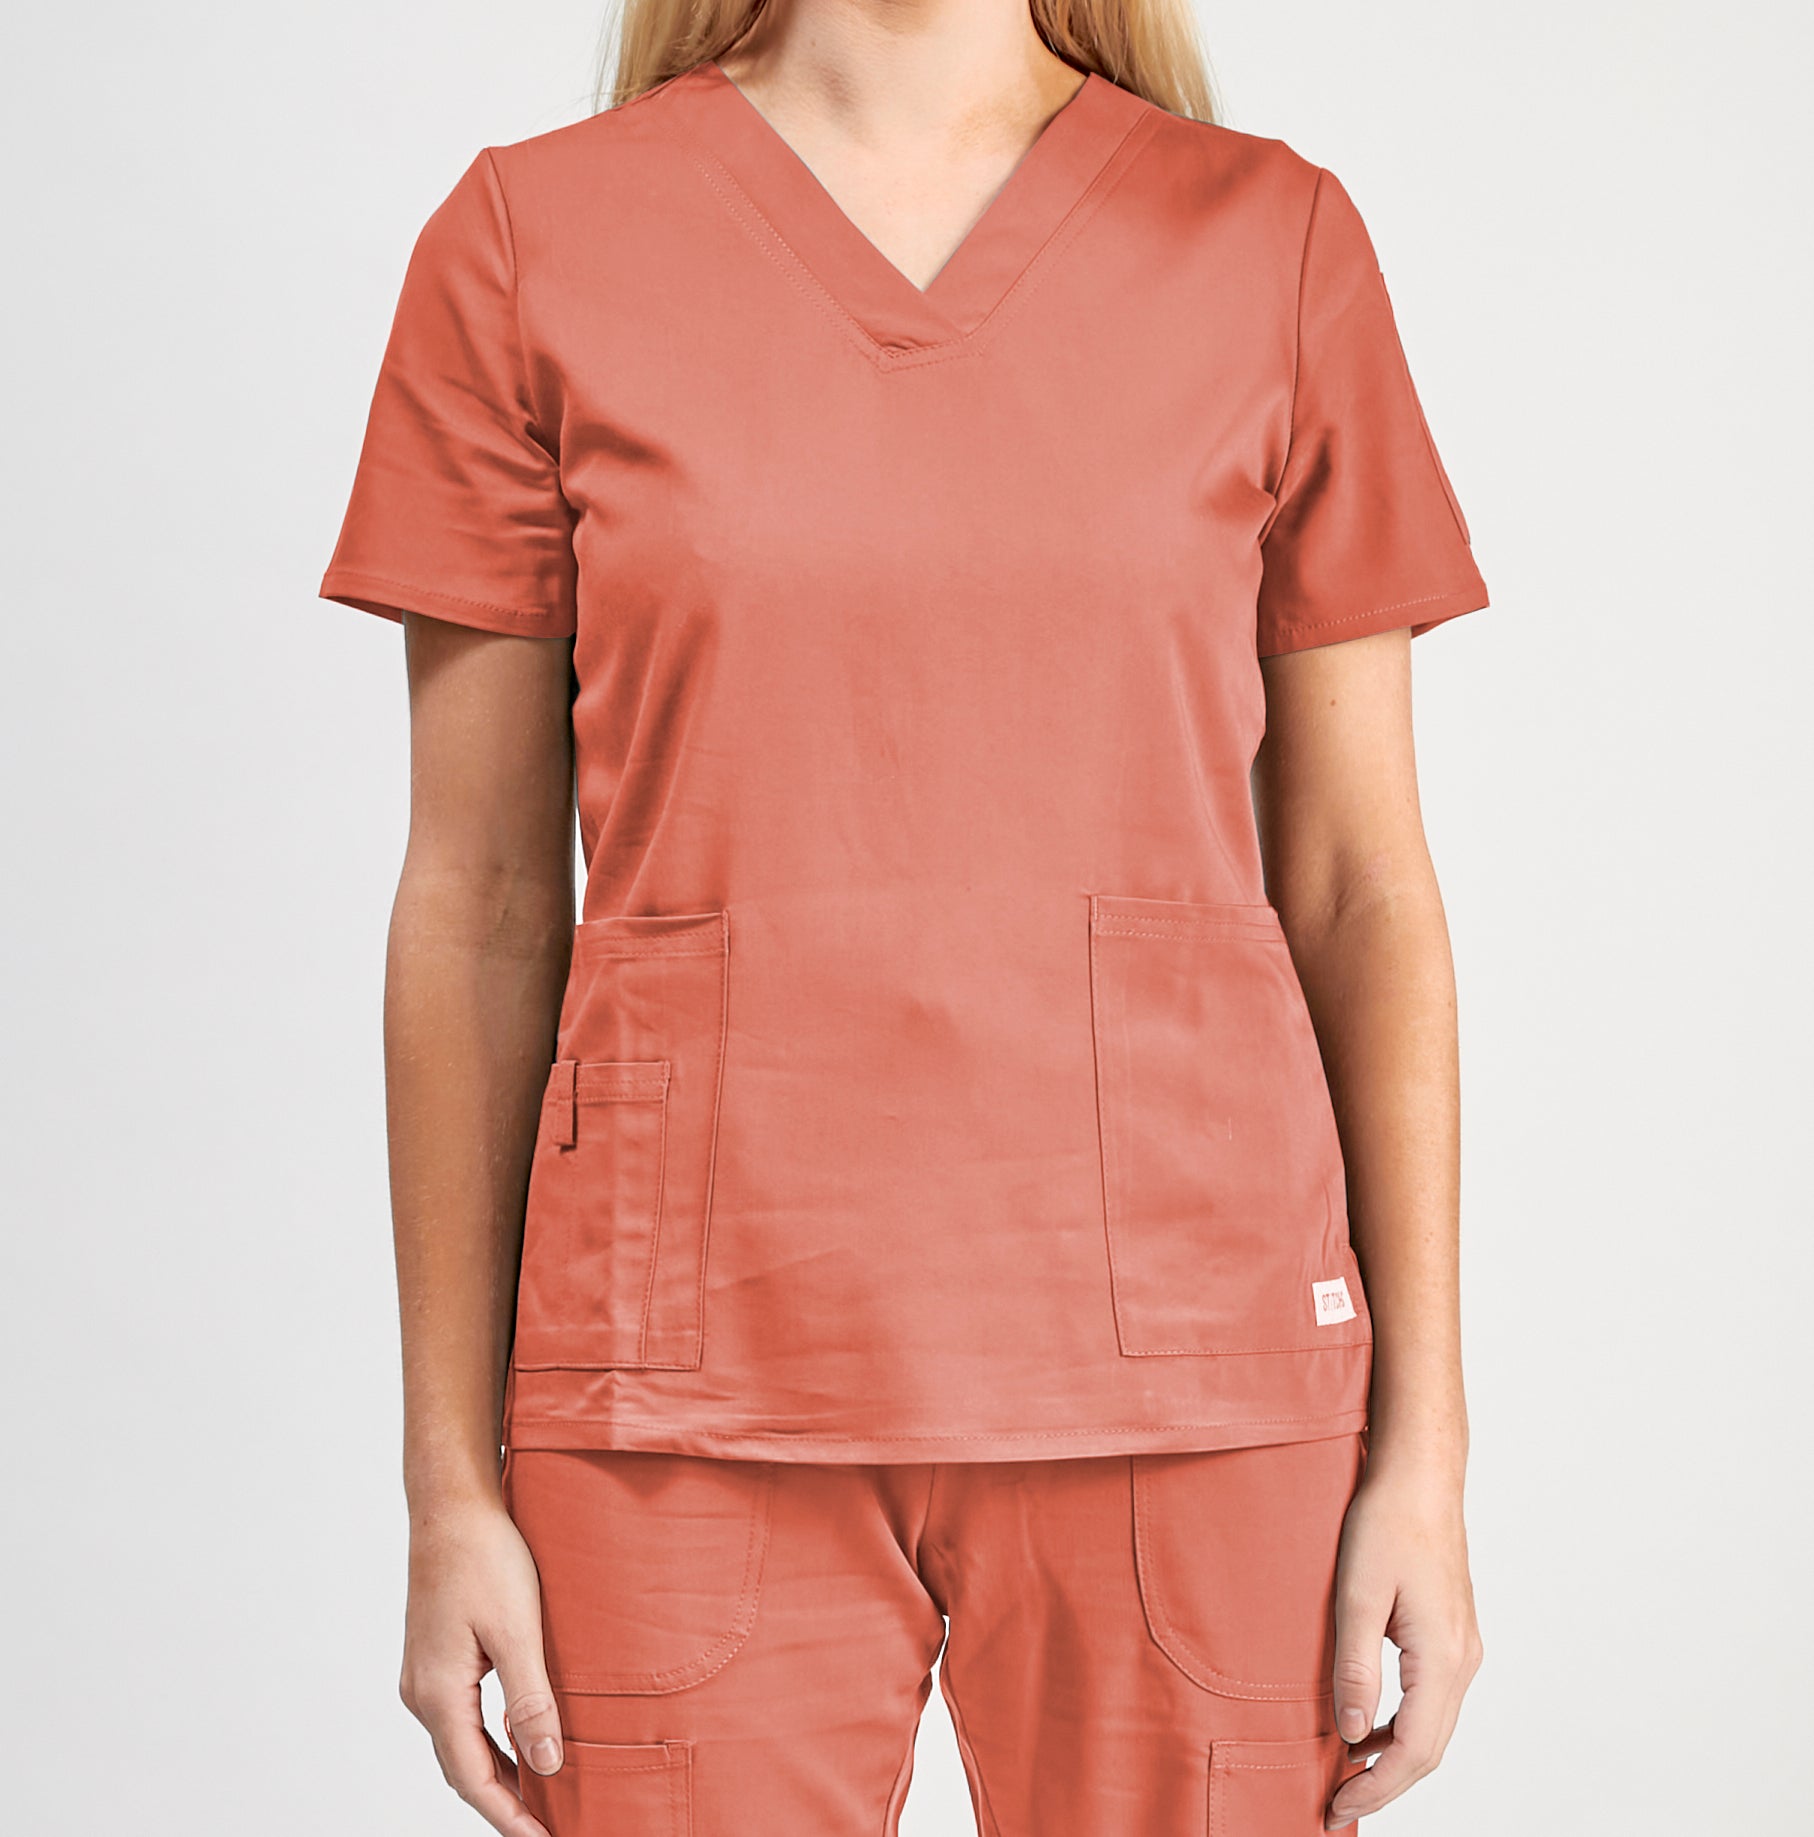 Uniforme clinico mujer one coral